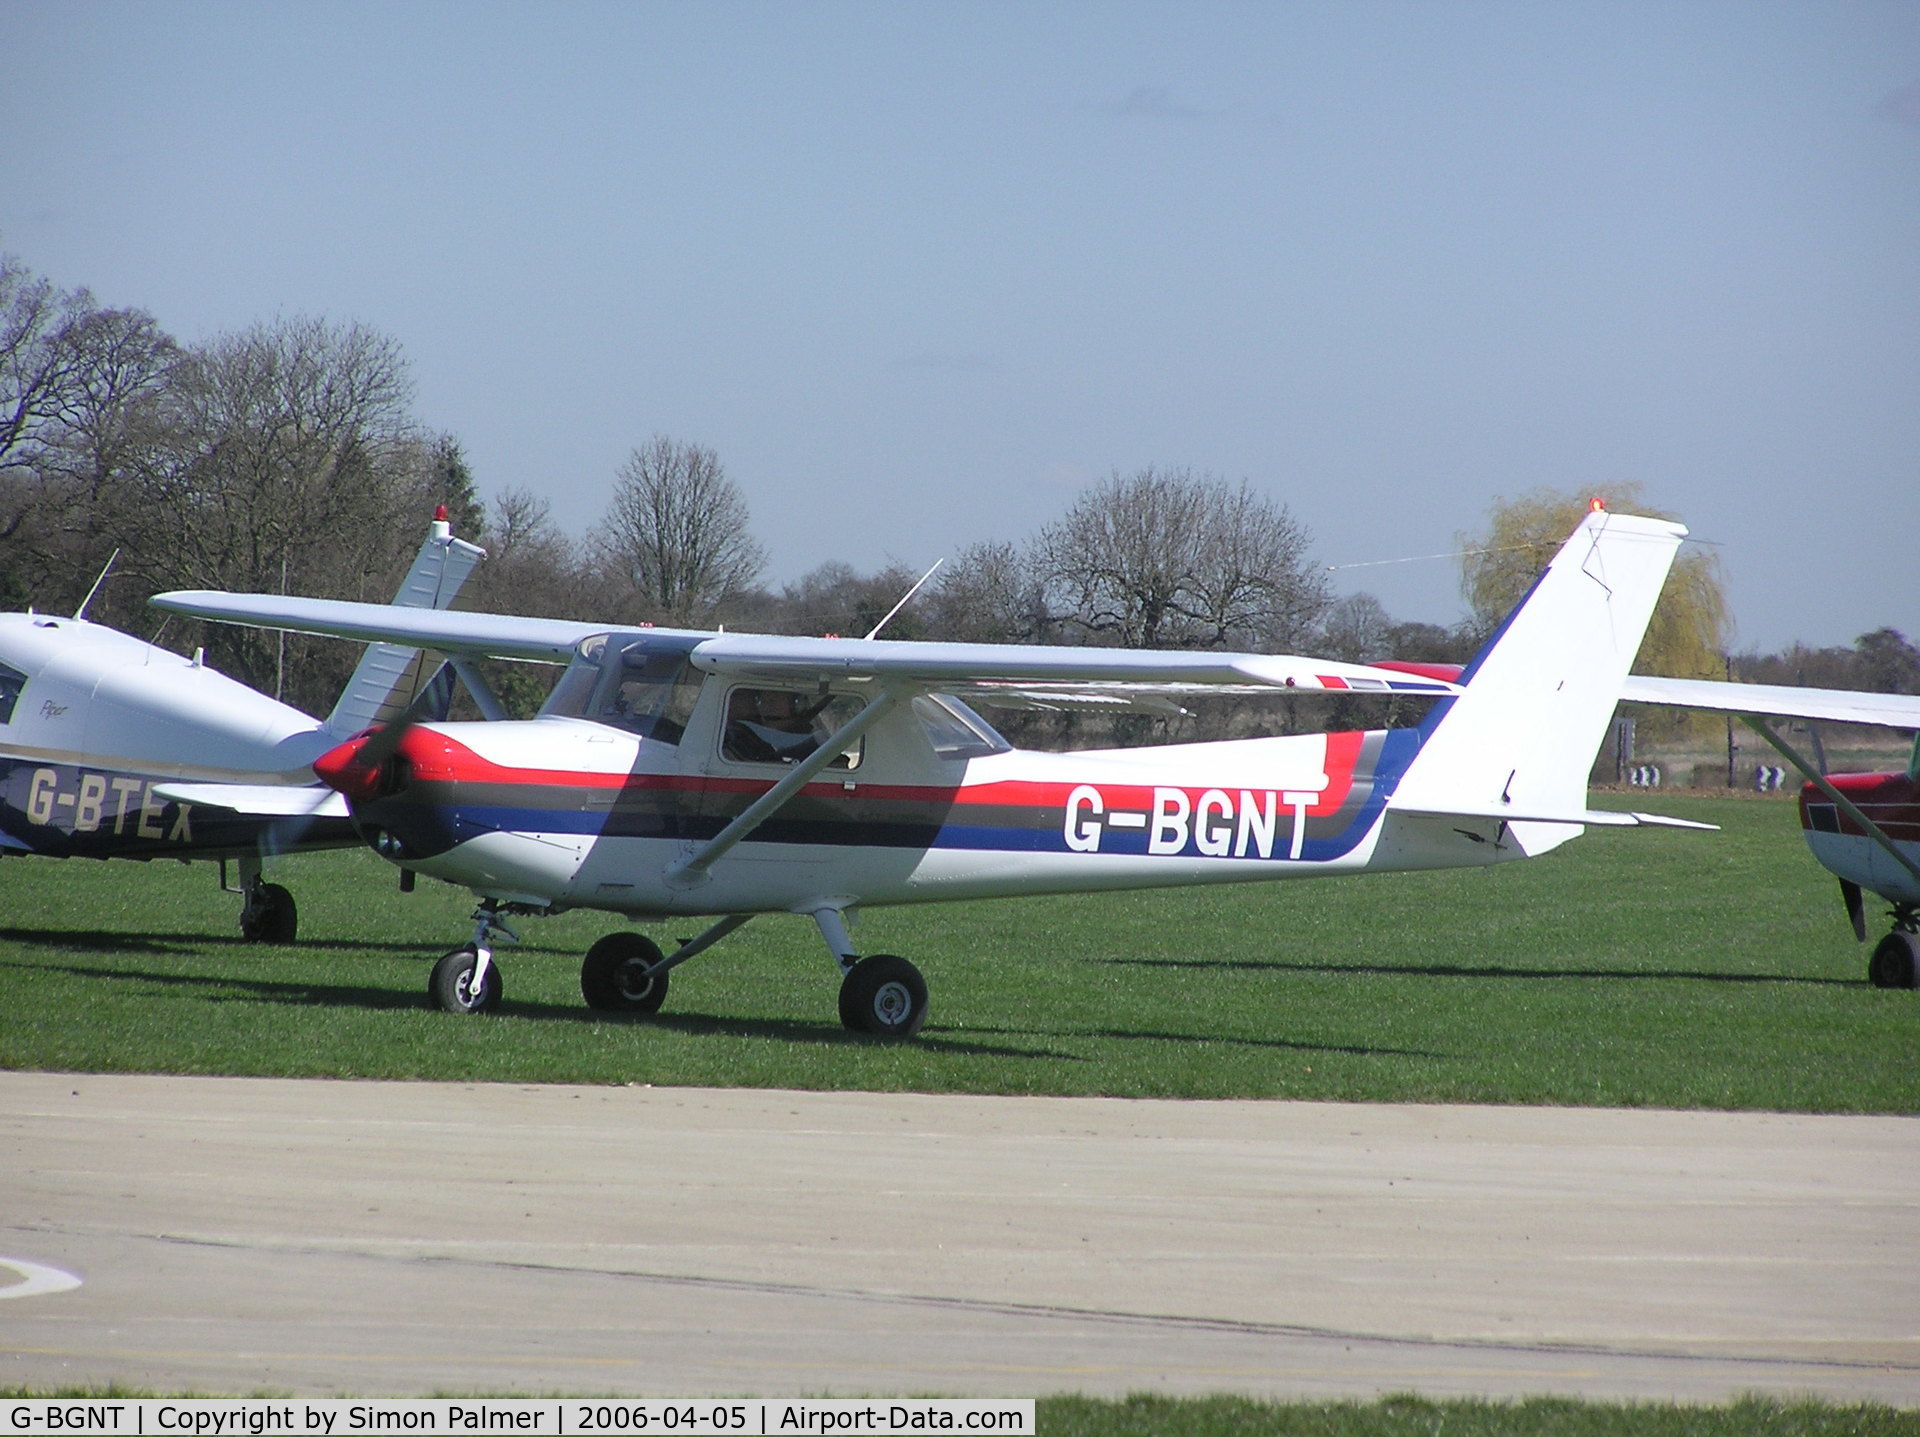 G-BGNT, 1979 Reims F152 C/N 1644, Cessna 152 at Sywell